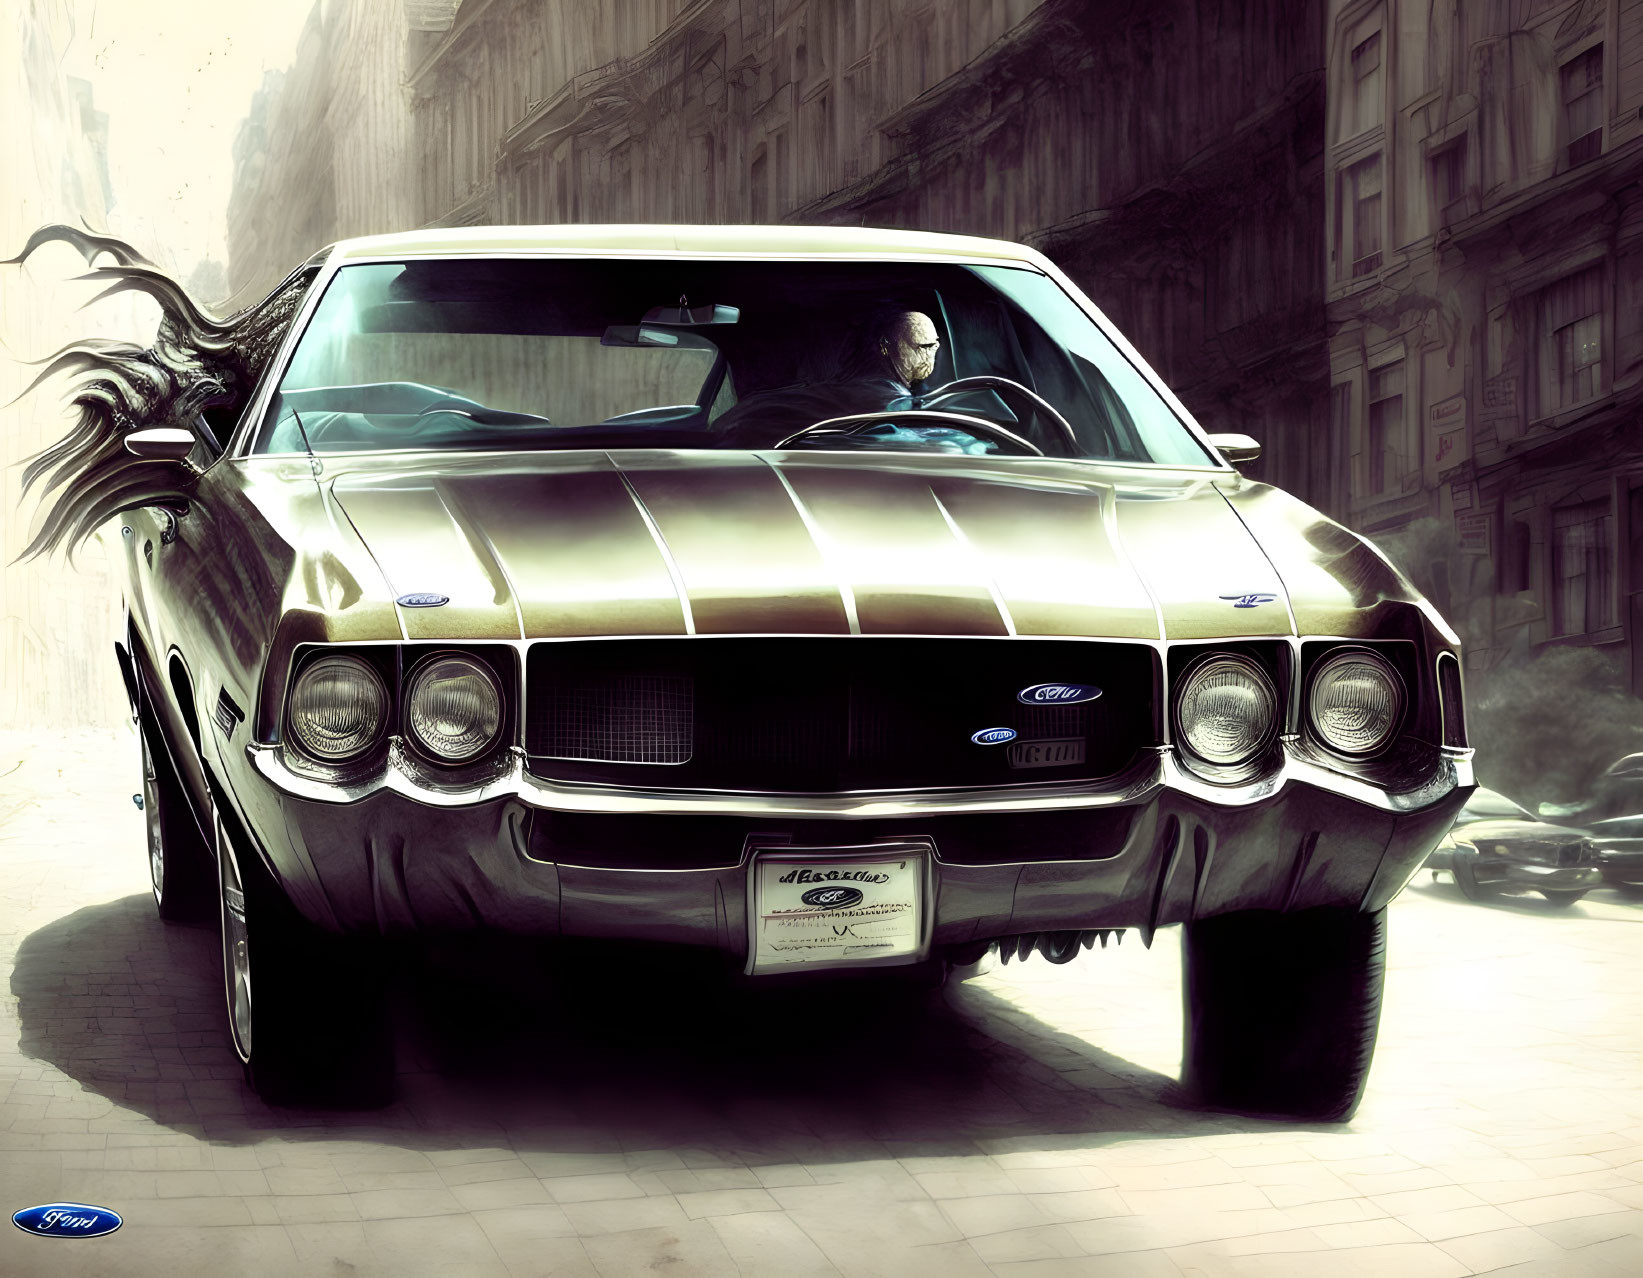 Digital Artwork: Person Driving Classic Ford Mustang with Racing Stripes